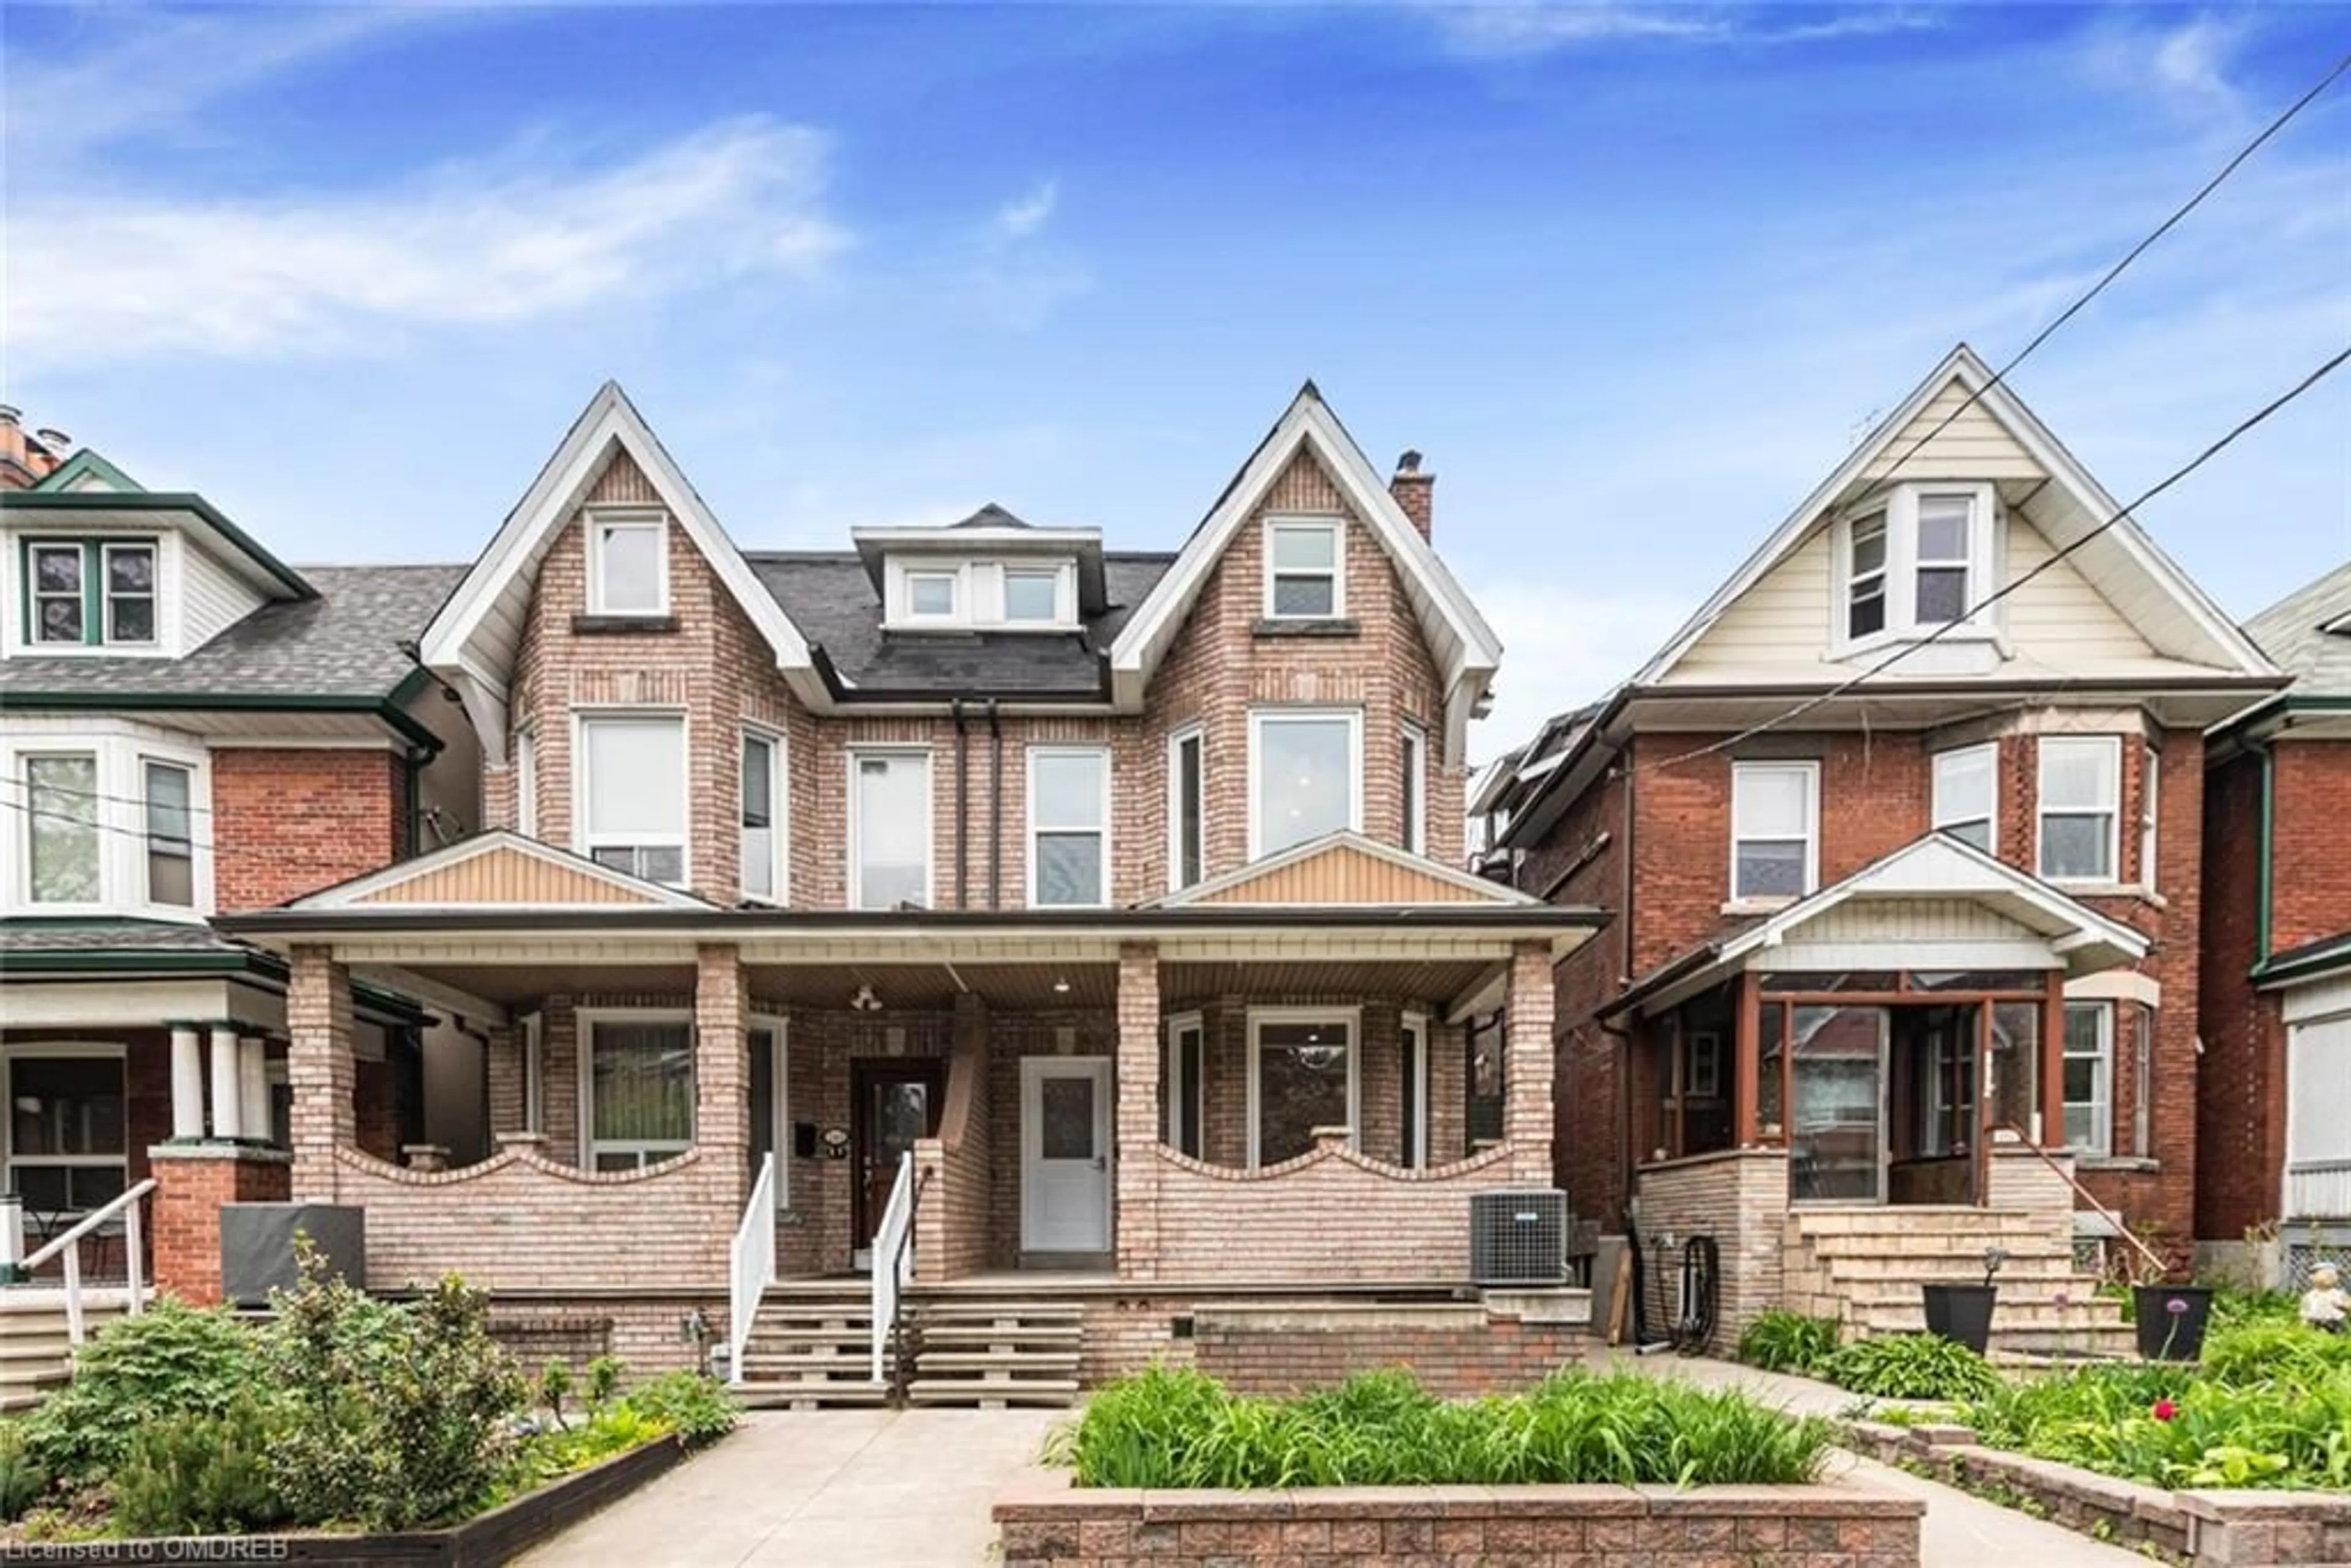 Home with brick exterior material for 250 Saint Clarens Ave, Toronto Ontario M6H 3W3